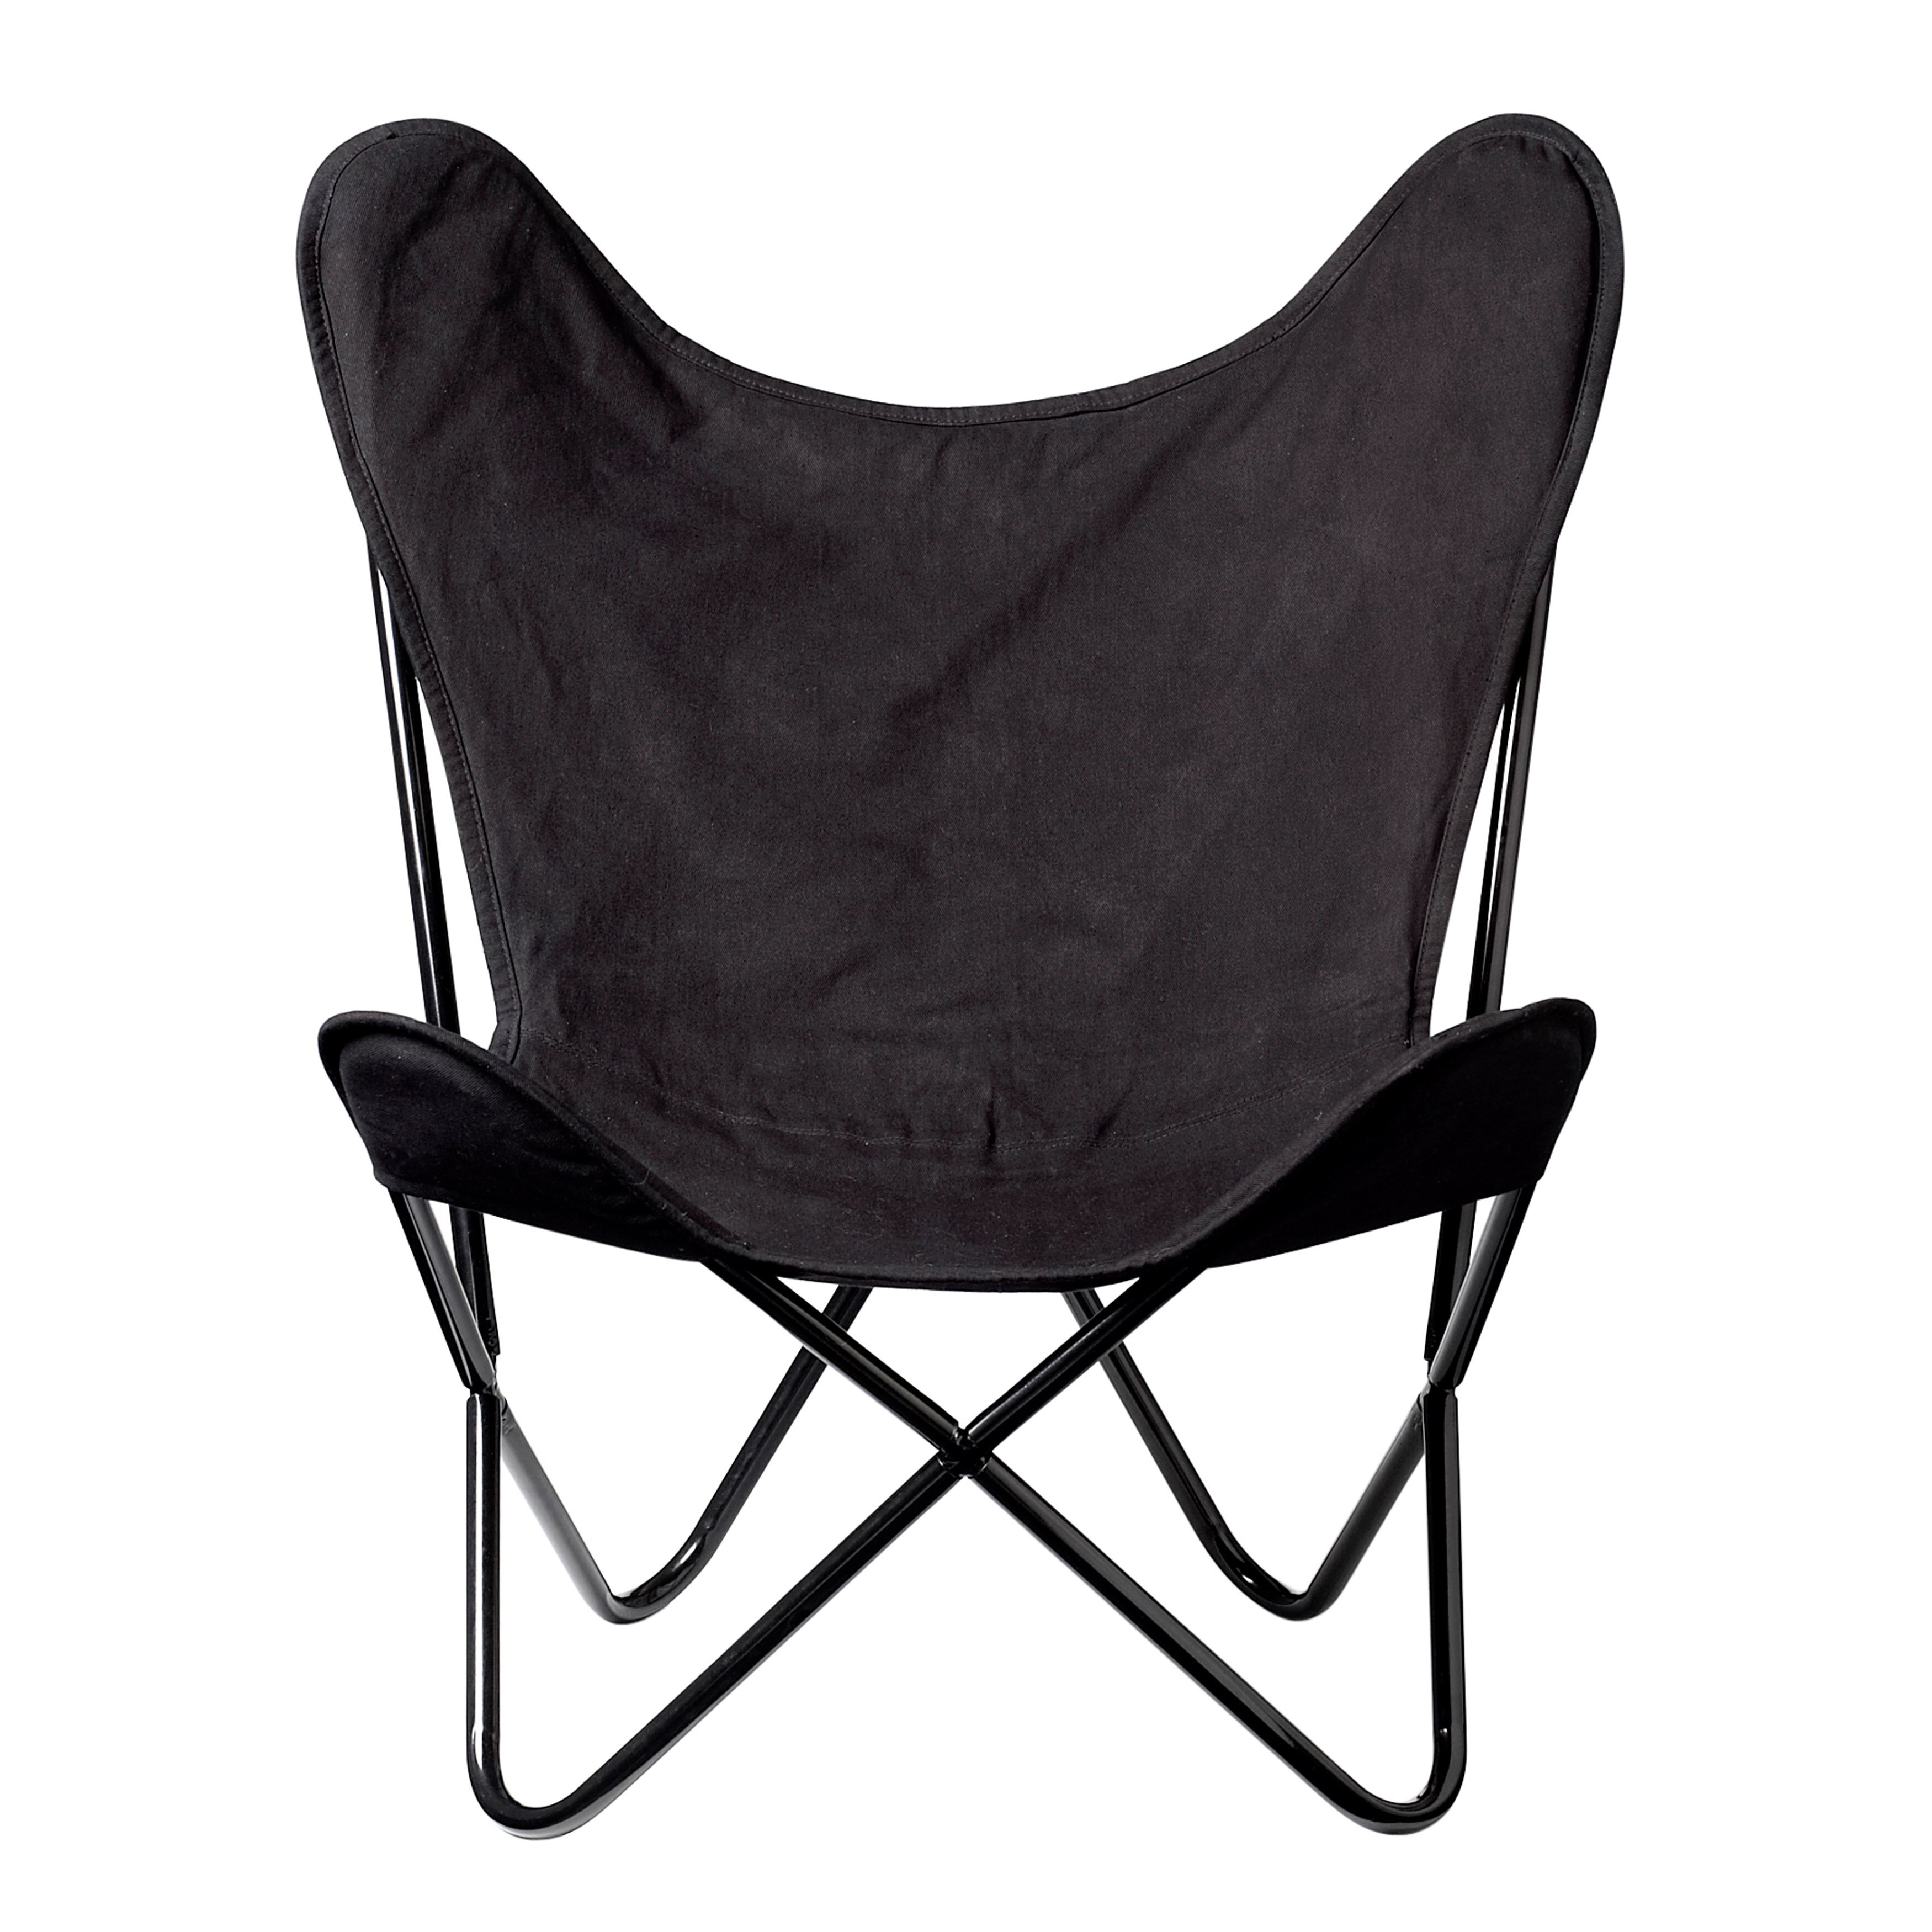 Bloomingville Canvas Butterfly Lounge Chair & Reviews | Wayfair